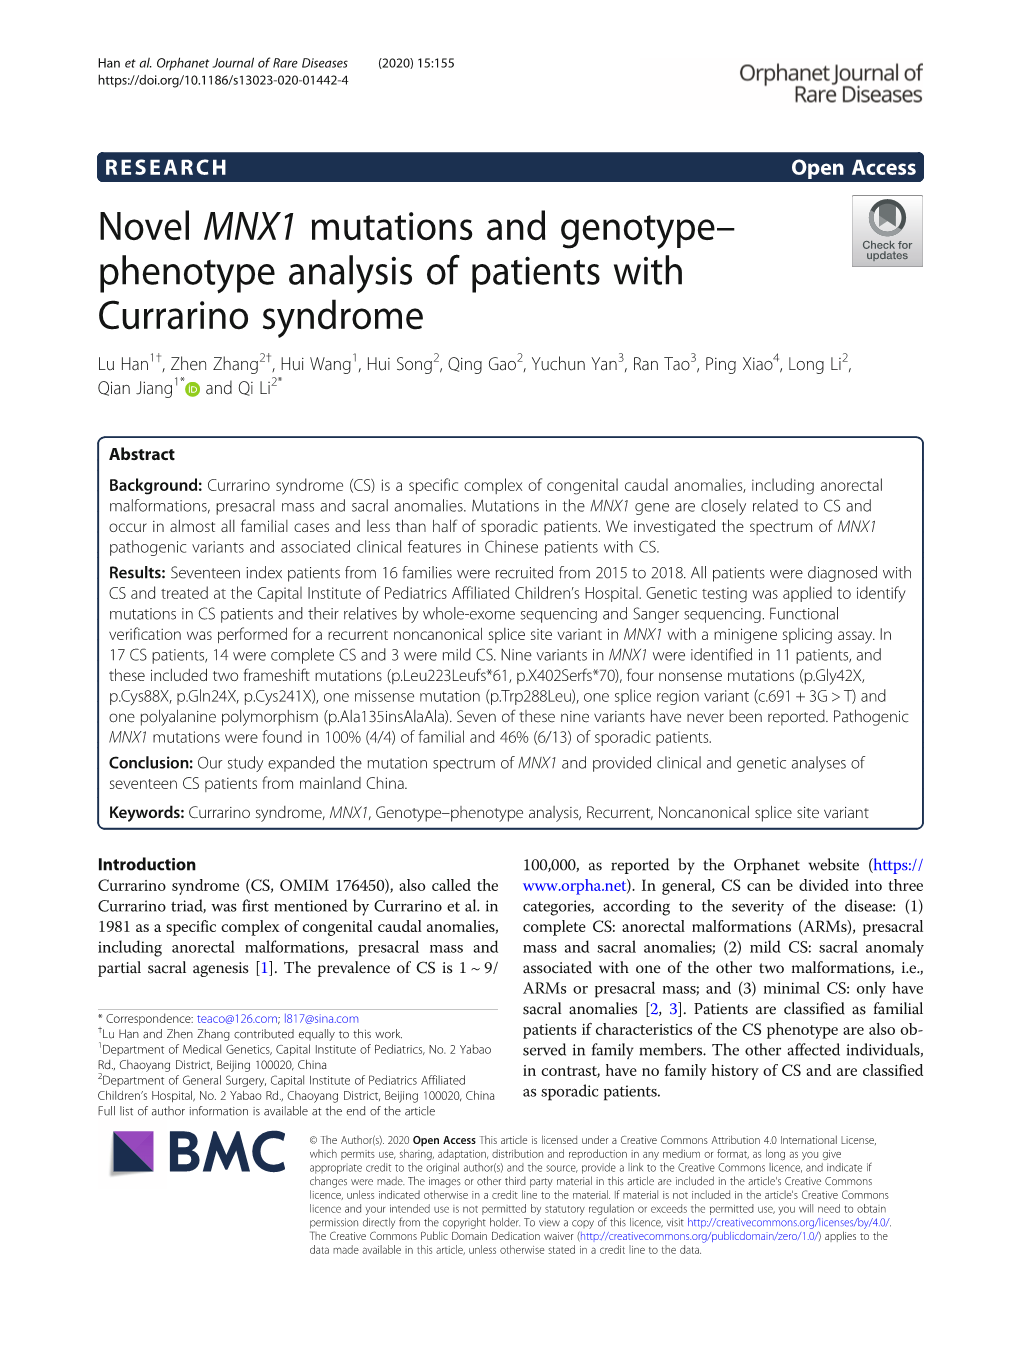 Novel MNX1 Mutations and Genotype–Phenotype Analysis of Patients